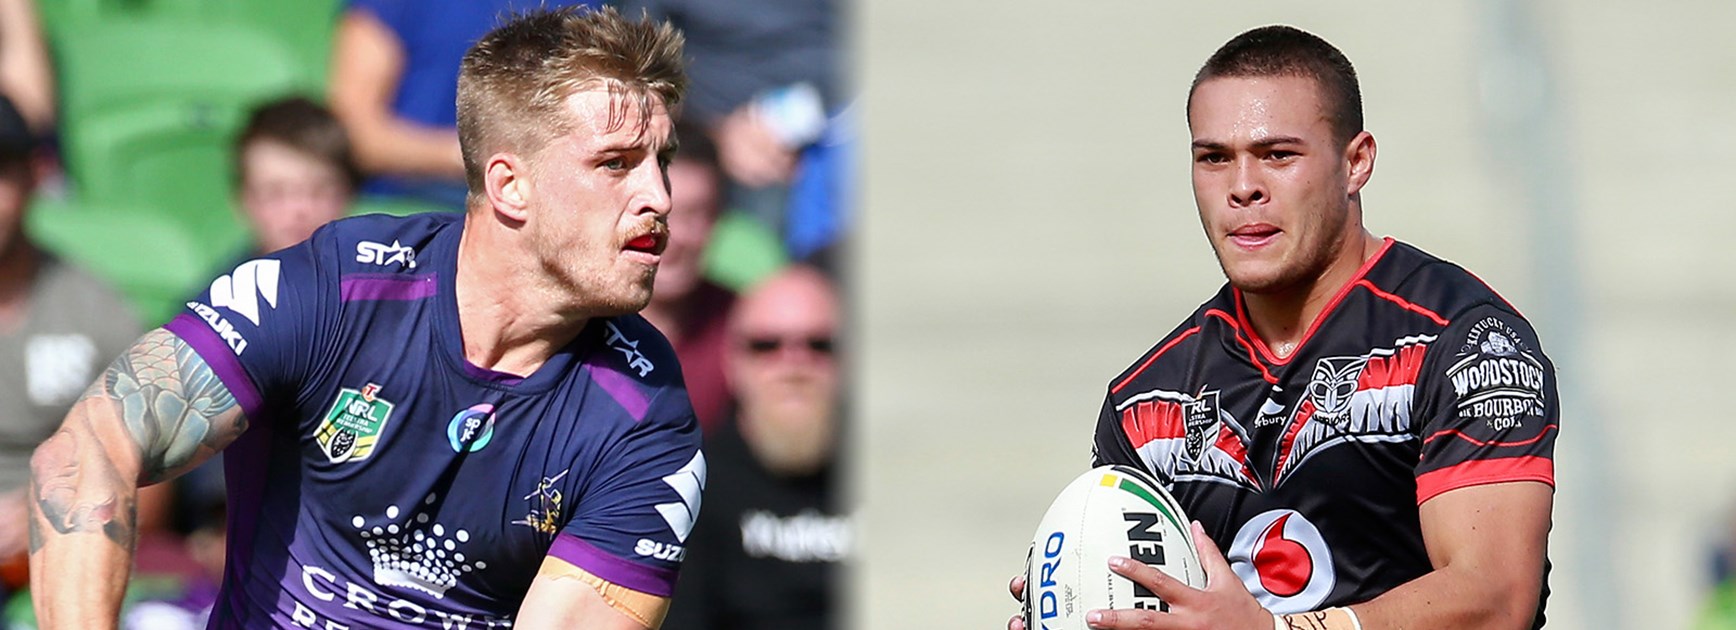 Cameron Munster and Tui Lolohea are both at fullback replacing superstars in their respective teams.